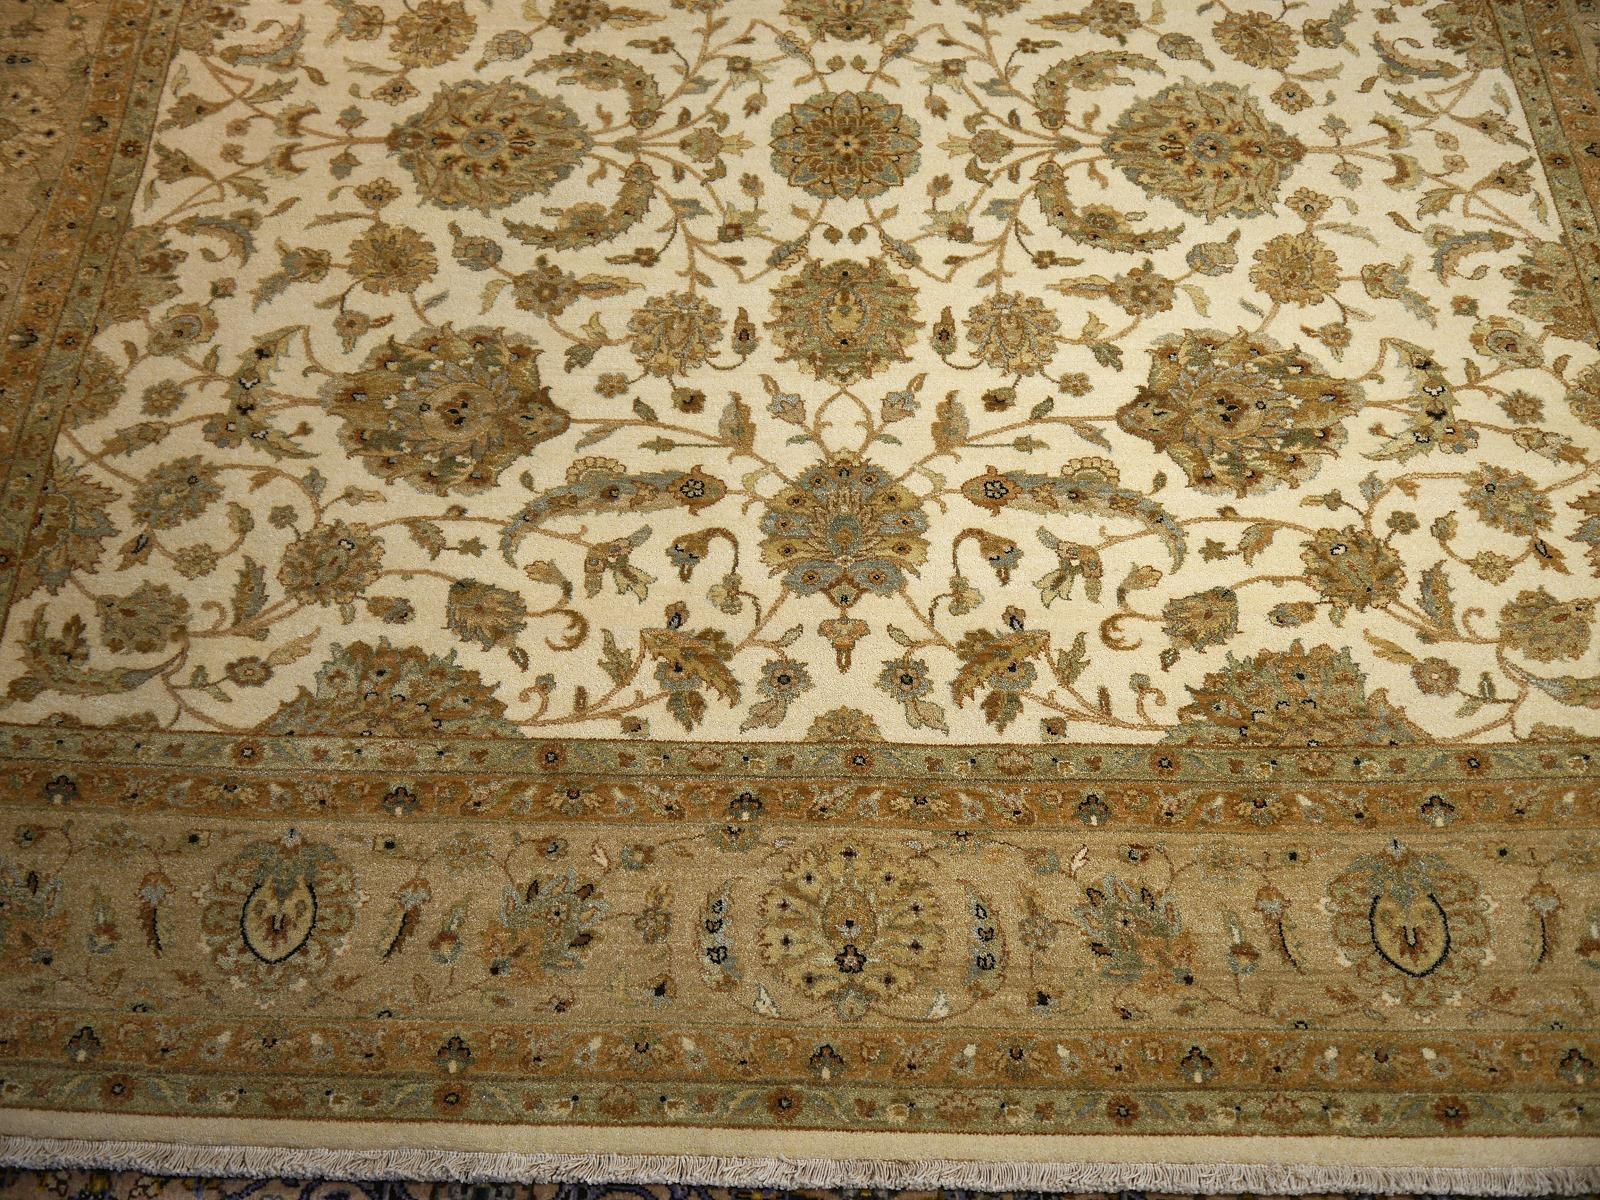 A beautiful square contemporary design carpet, hand knotted using finest wool. On a light crème field, the design of Lotus blossoms standing next to each other executed in green tones. 
Design Influences are from Persian Tabriz and antique Ziegler